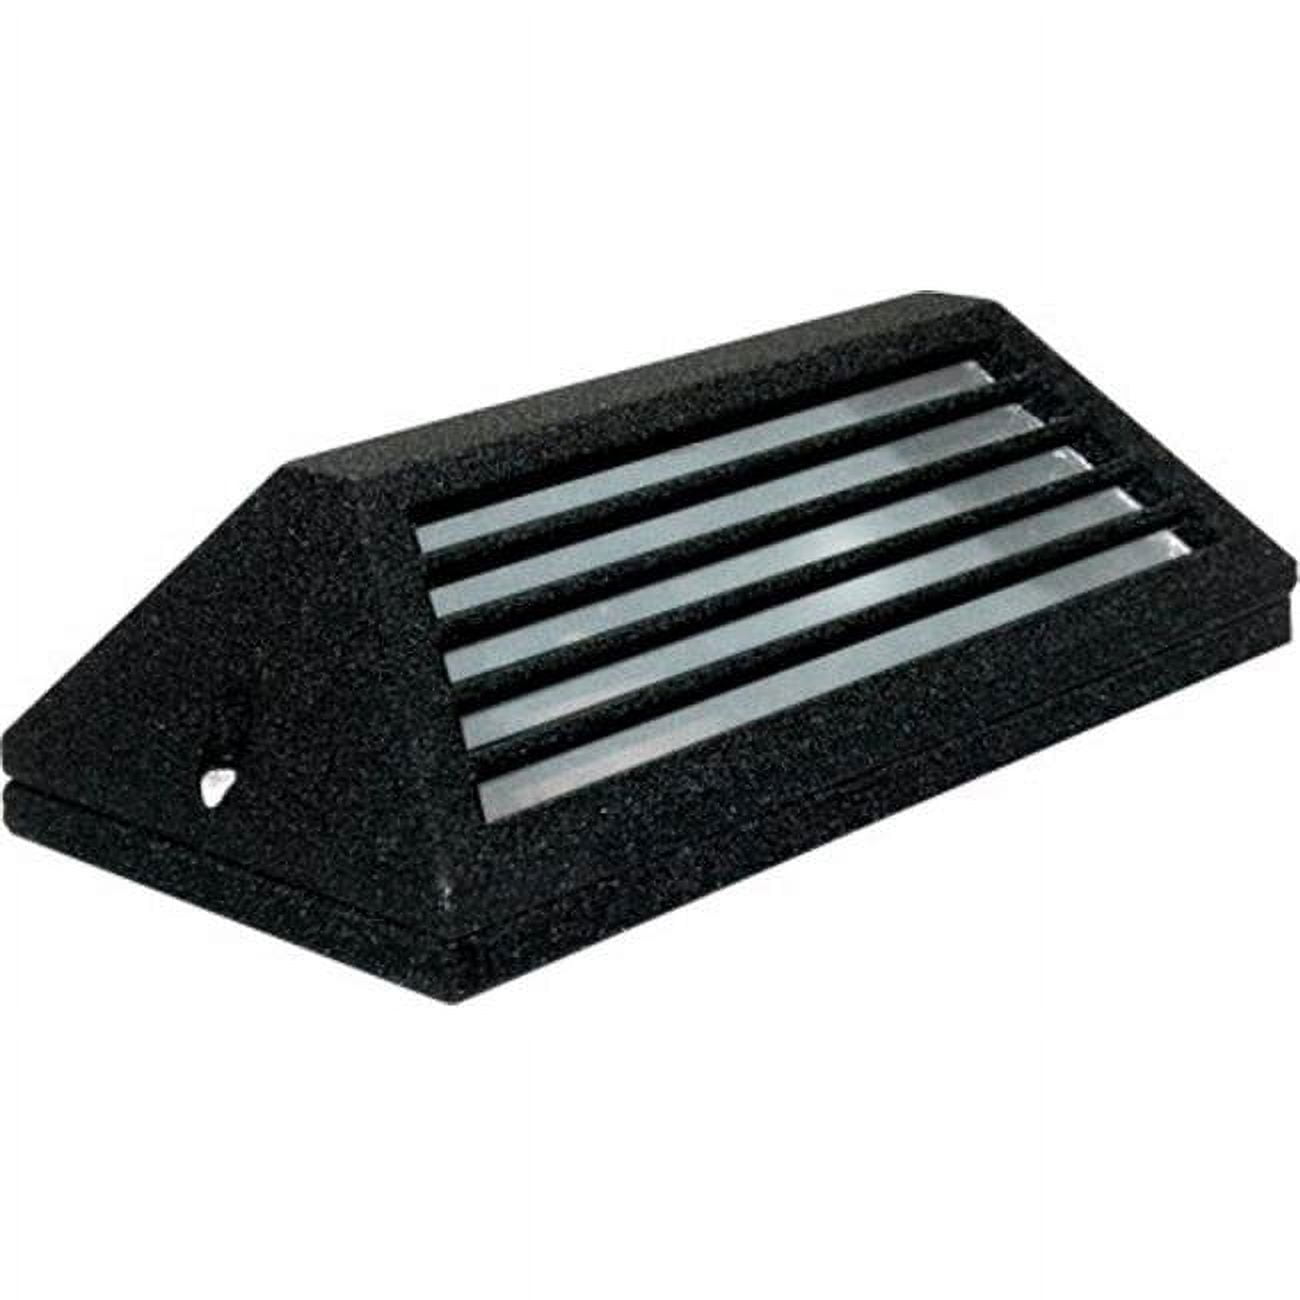 Picture of Dabmar Lighting LV608-B Cast Aluminum Surface Mount Louvered Brick, Step, Wall & Deck Light, Black - 4 x 7.25 x 2.25 in.